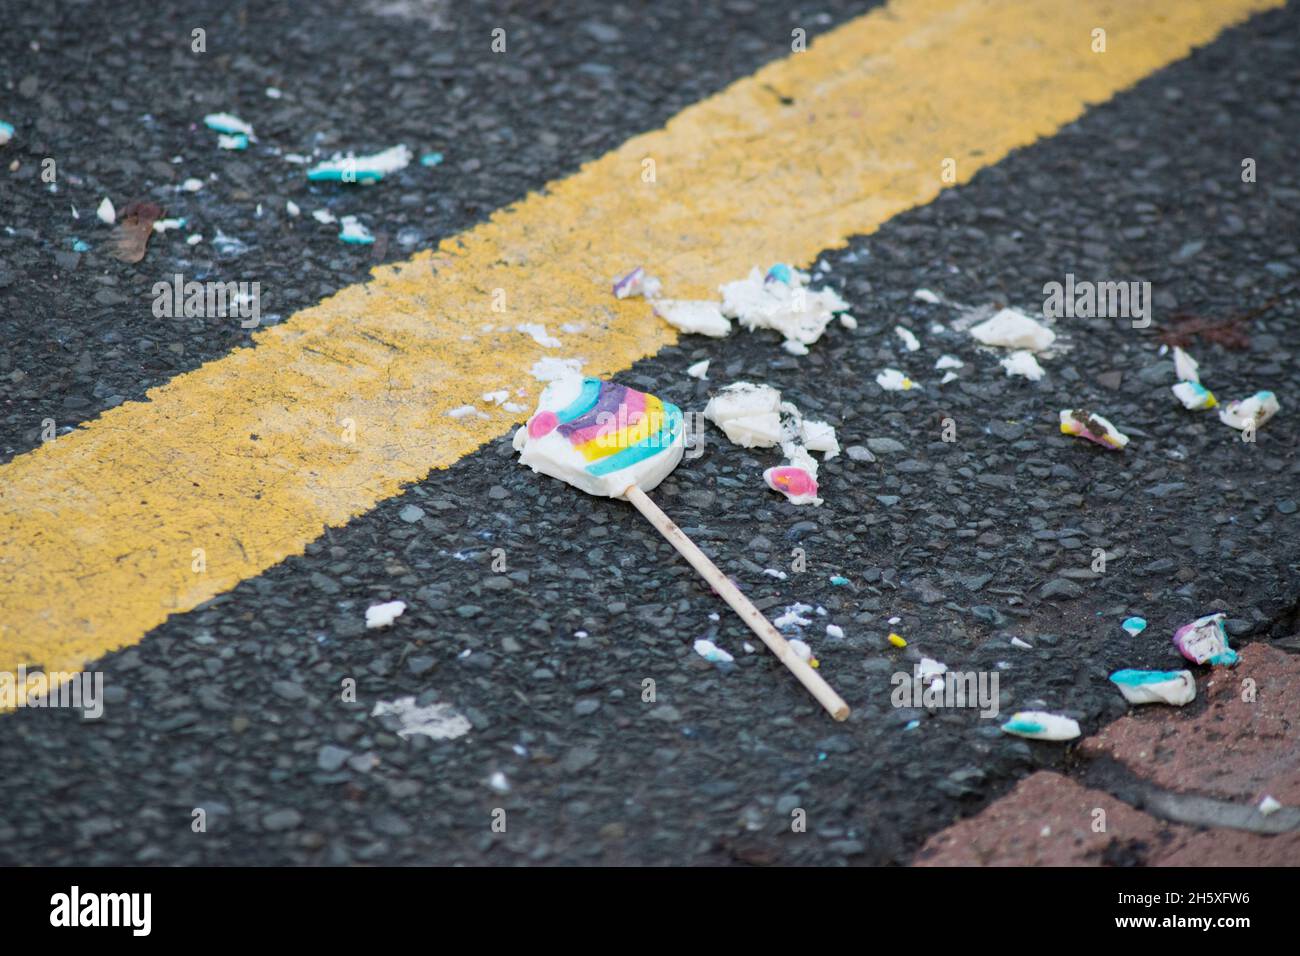 Colorful lollipop dropped and broken on the road Stock Photo